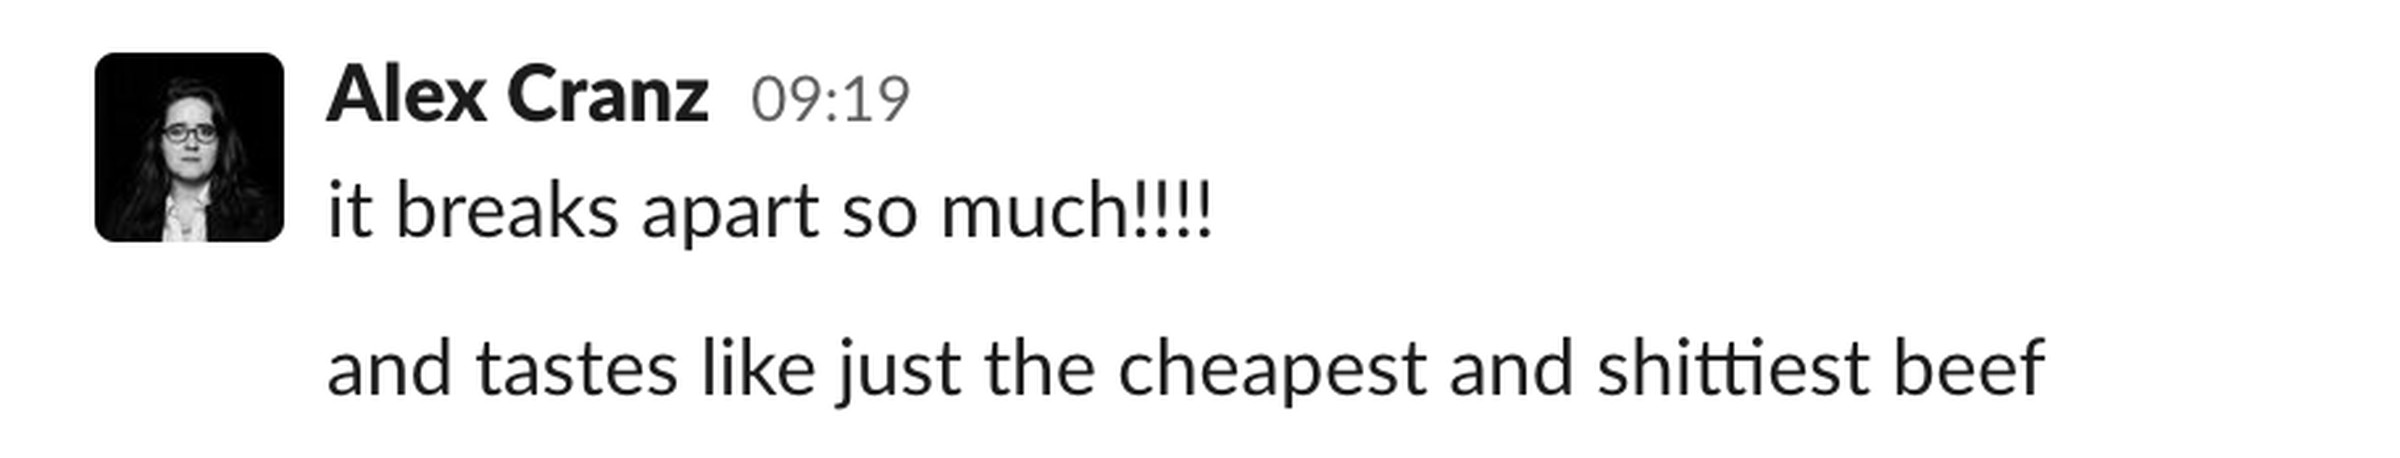 Screenshot of a Slack message from Alex Cranz reading “it breaks apart so much!!!! and taste like just the cheapest and shittiest beef.”